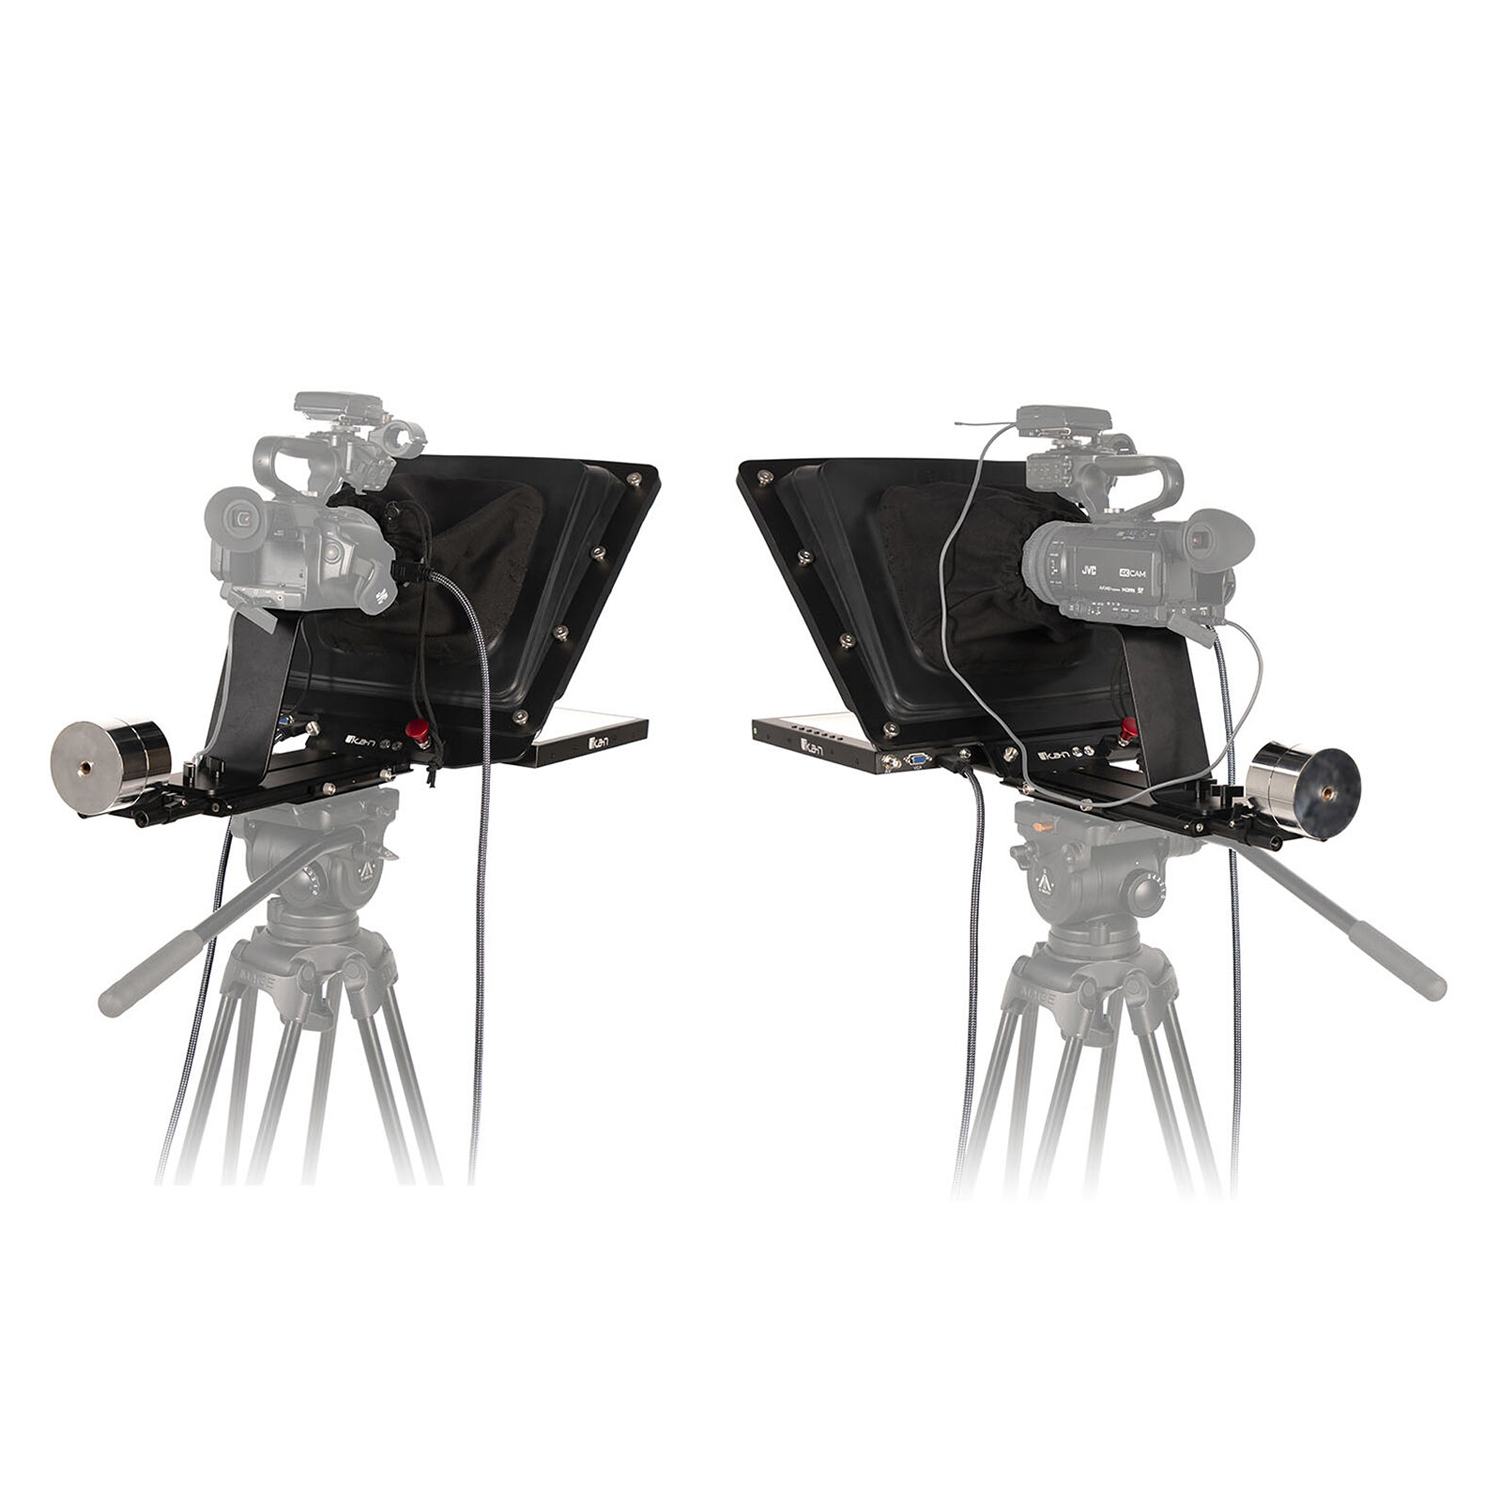 ikan P2P Interview System with 2 Professional 15" High-Bright Teleprompters